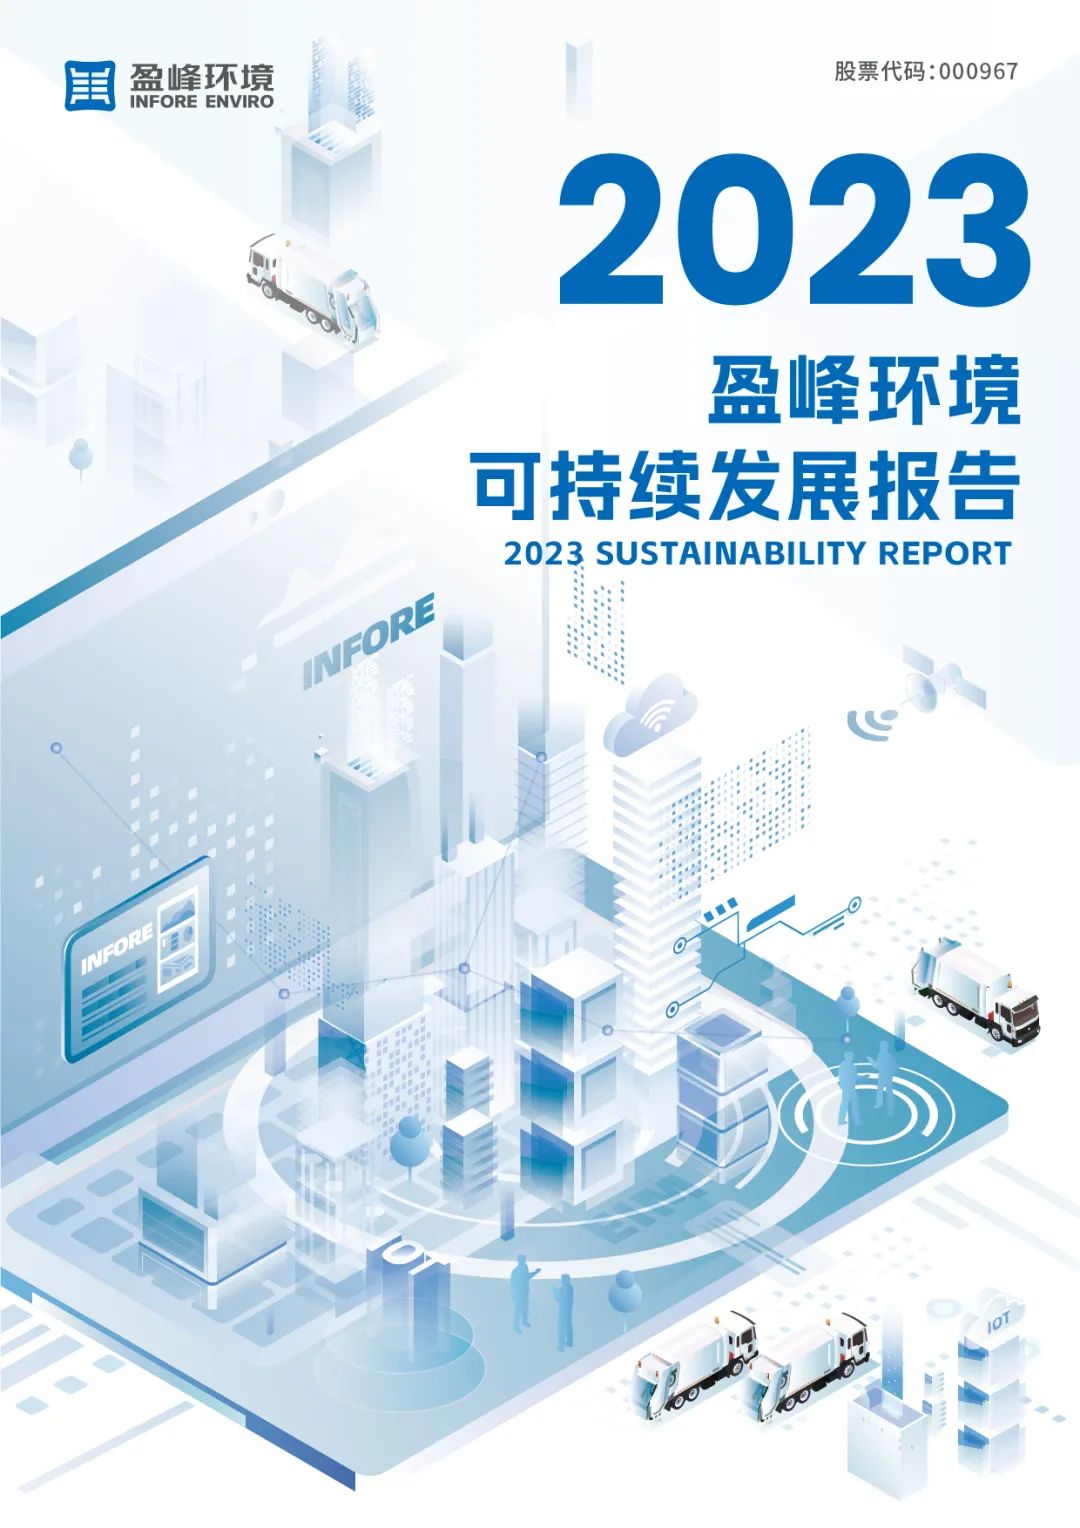 2023 Yingfeng Environmental Sustainable Development Report Released